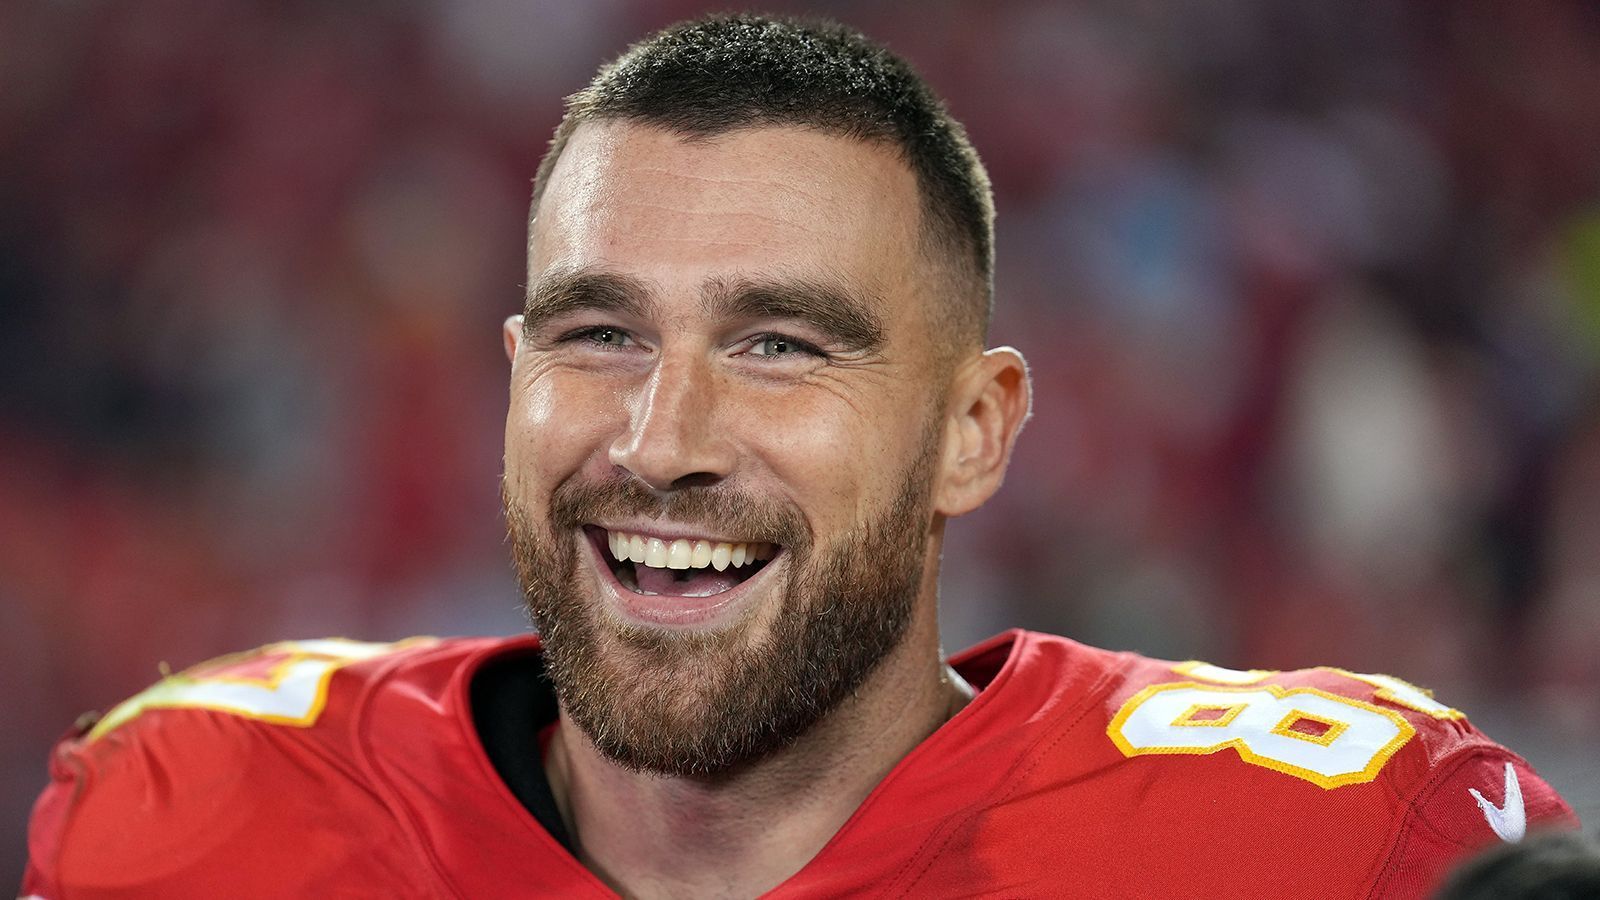 
                <strong>Tight End: Travis Kelce</strong><br>
                &#x2022; Aktuelle Franchise: Kansas City Chiefs<br>&#x2022; In der NFL seit: 2013<br>
              